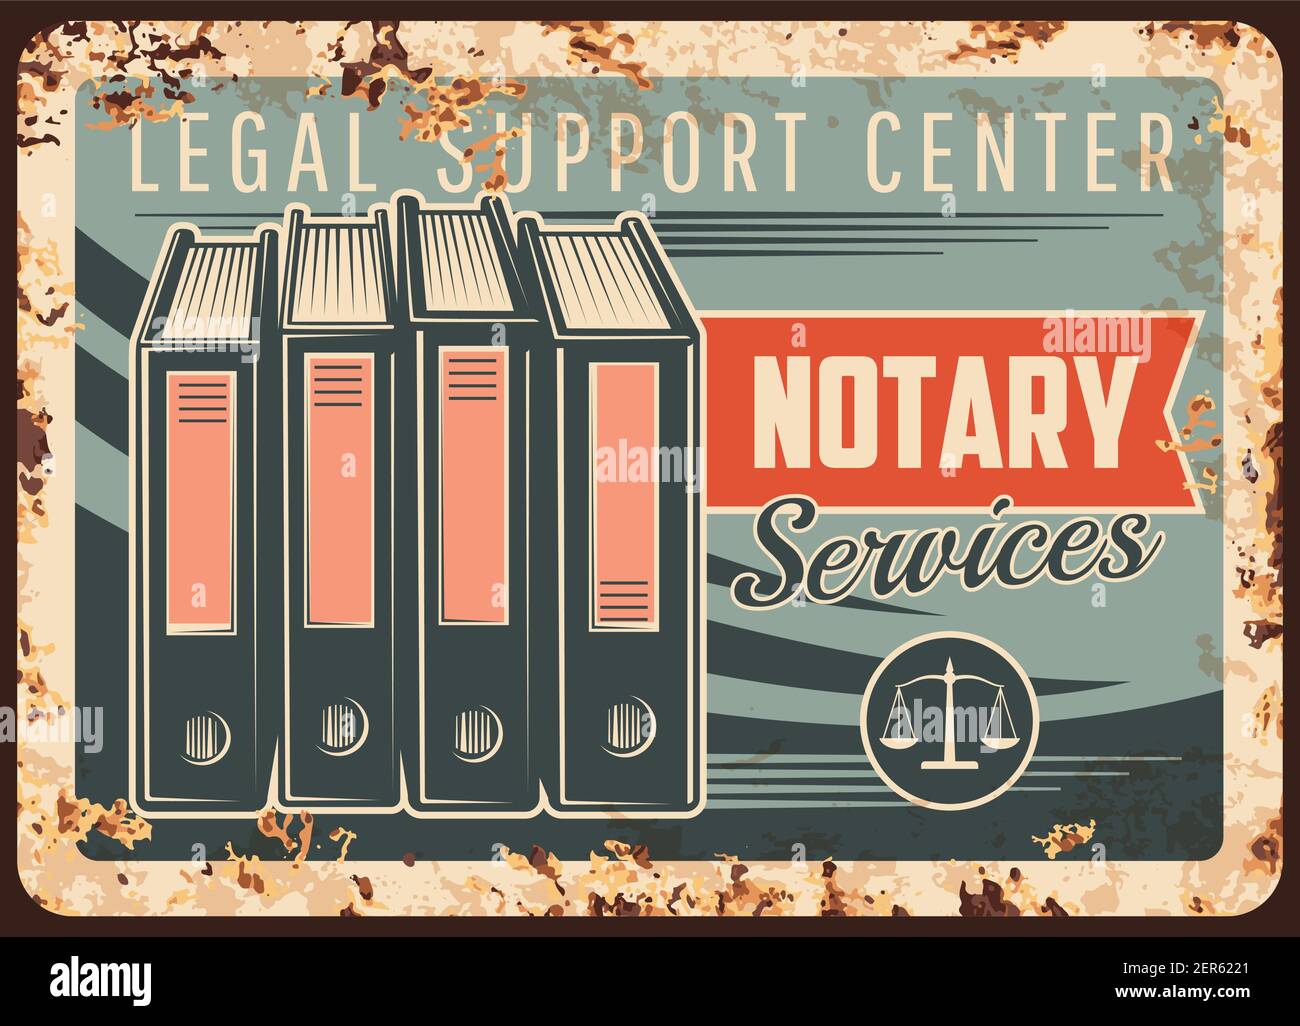 Notary service rusty metal plate, vector notarial office legal support center vintage rust tin sign. Civil juridical rights, inheritance registration Stock Vector